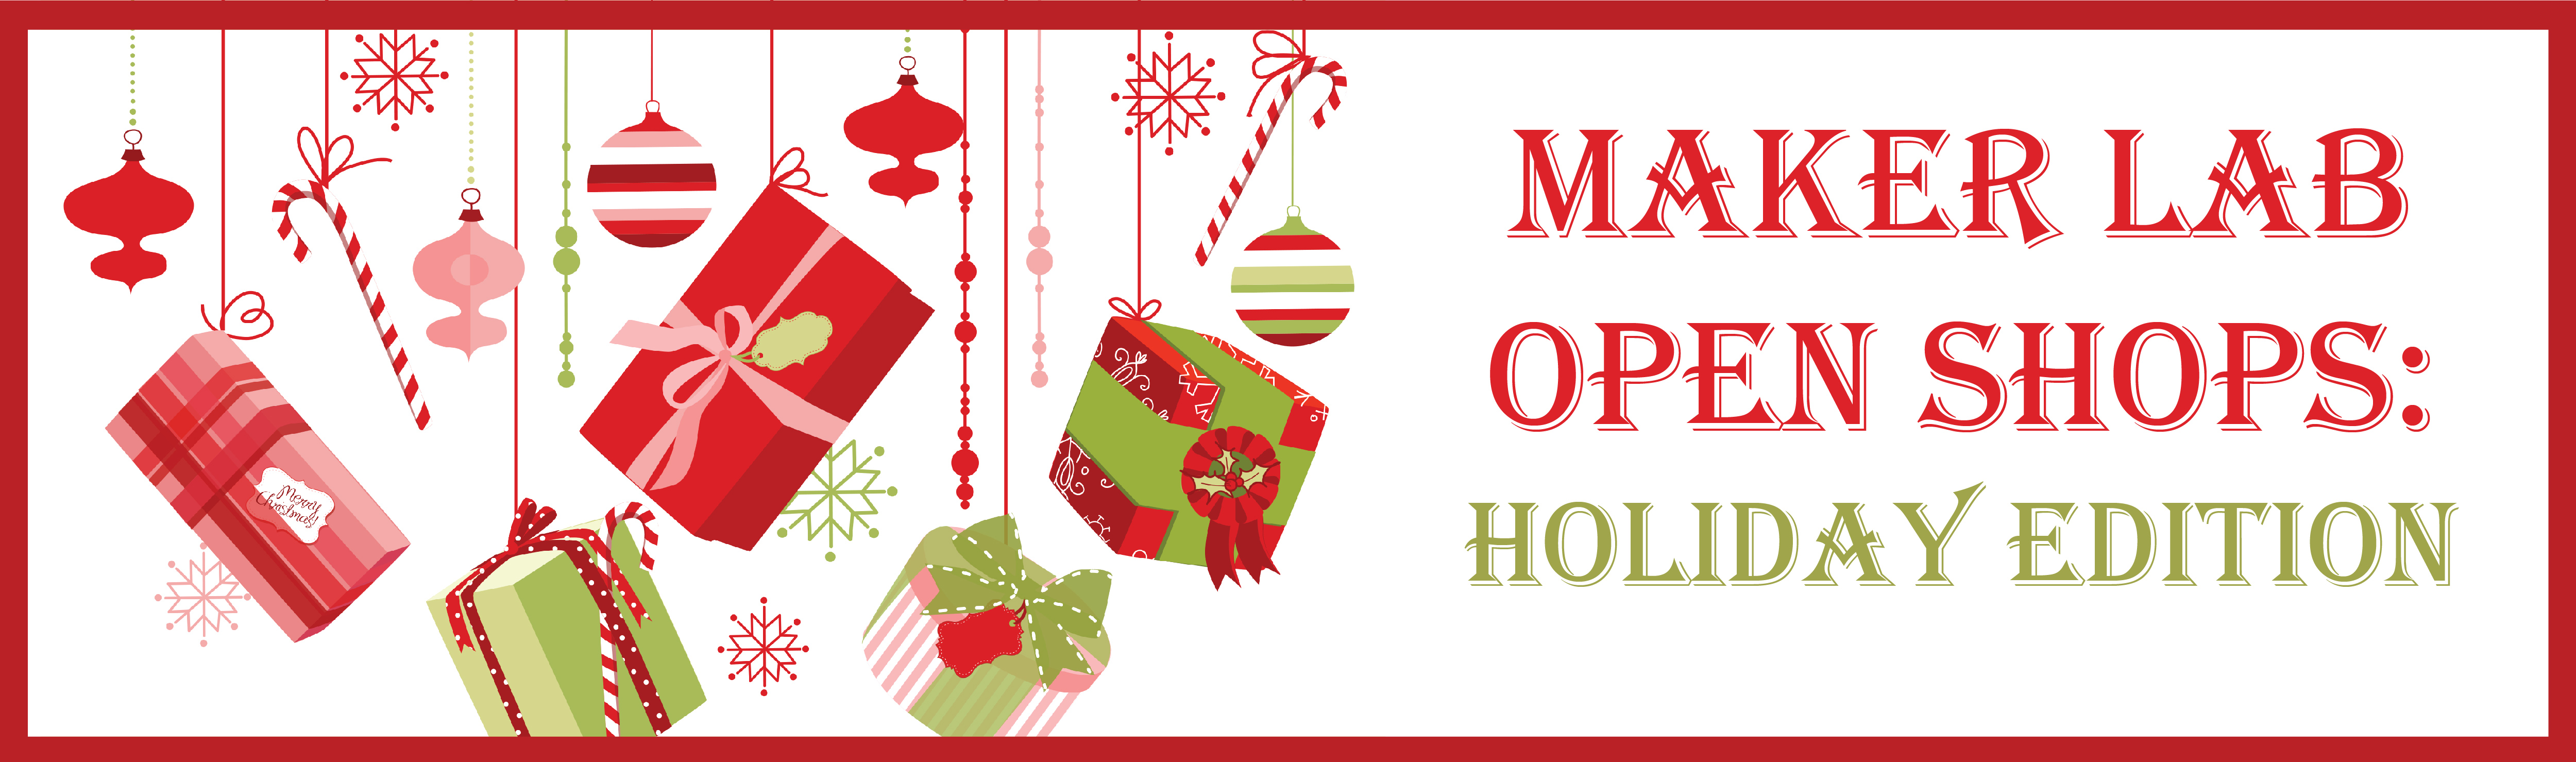 Maker Lab Open Shops: Holiday Edition (December 2018), Fountaindale Public Library